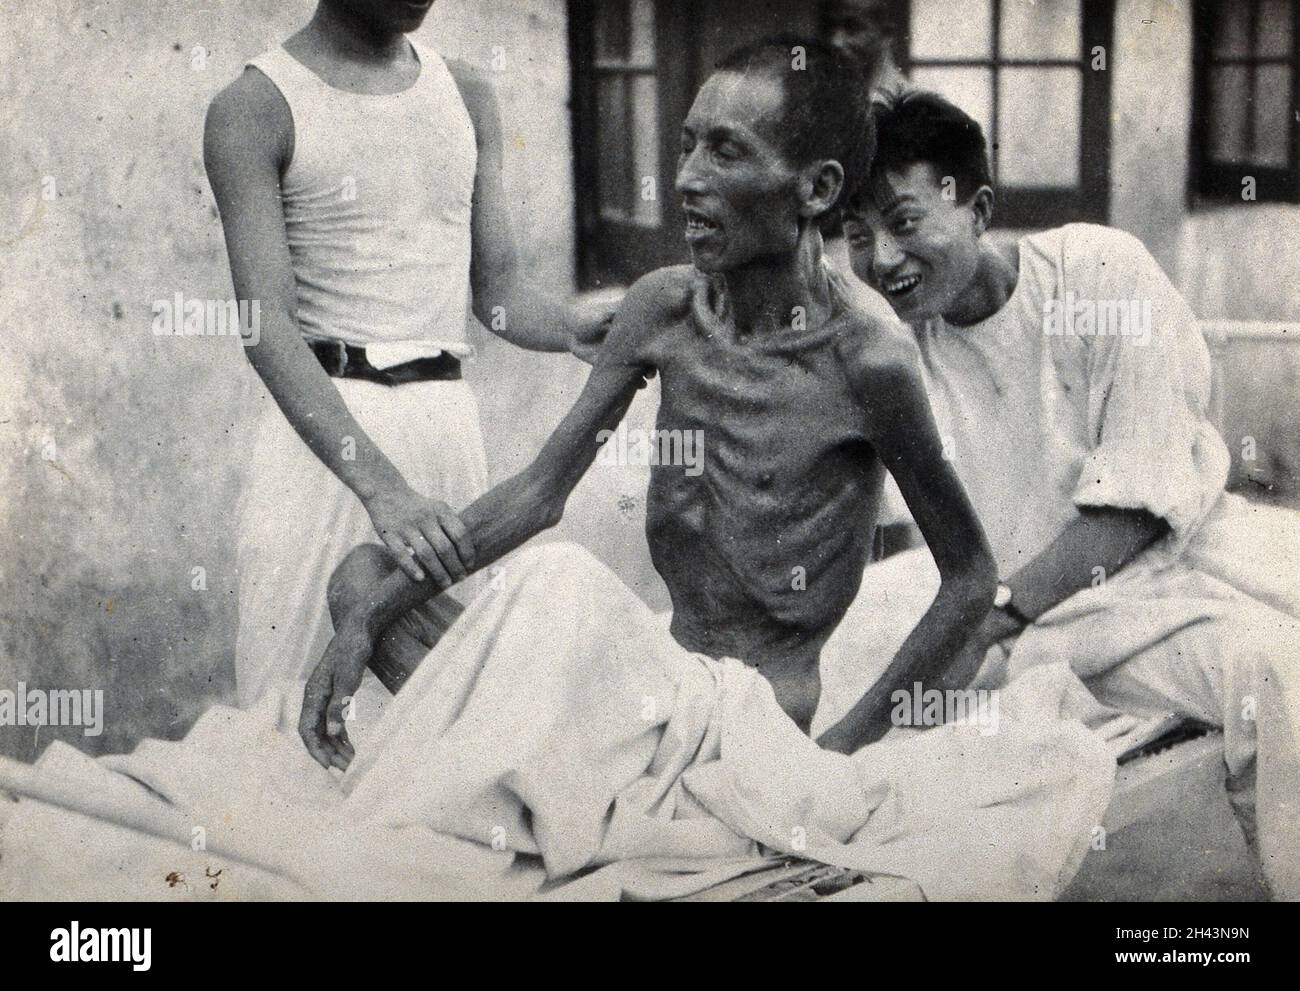 An emaciated man, rescued from a premature burial, being helped to sit up on an outdoor hospital bed. Photograph. Stock Photo